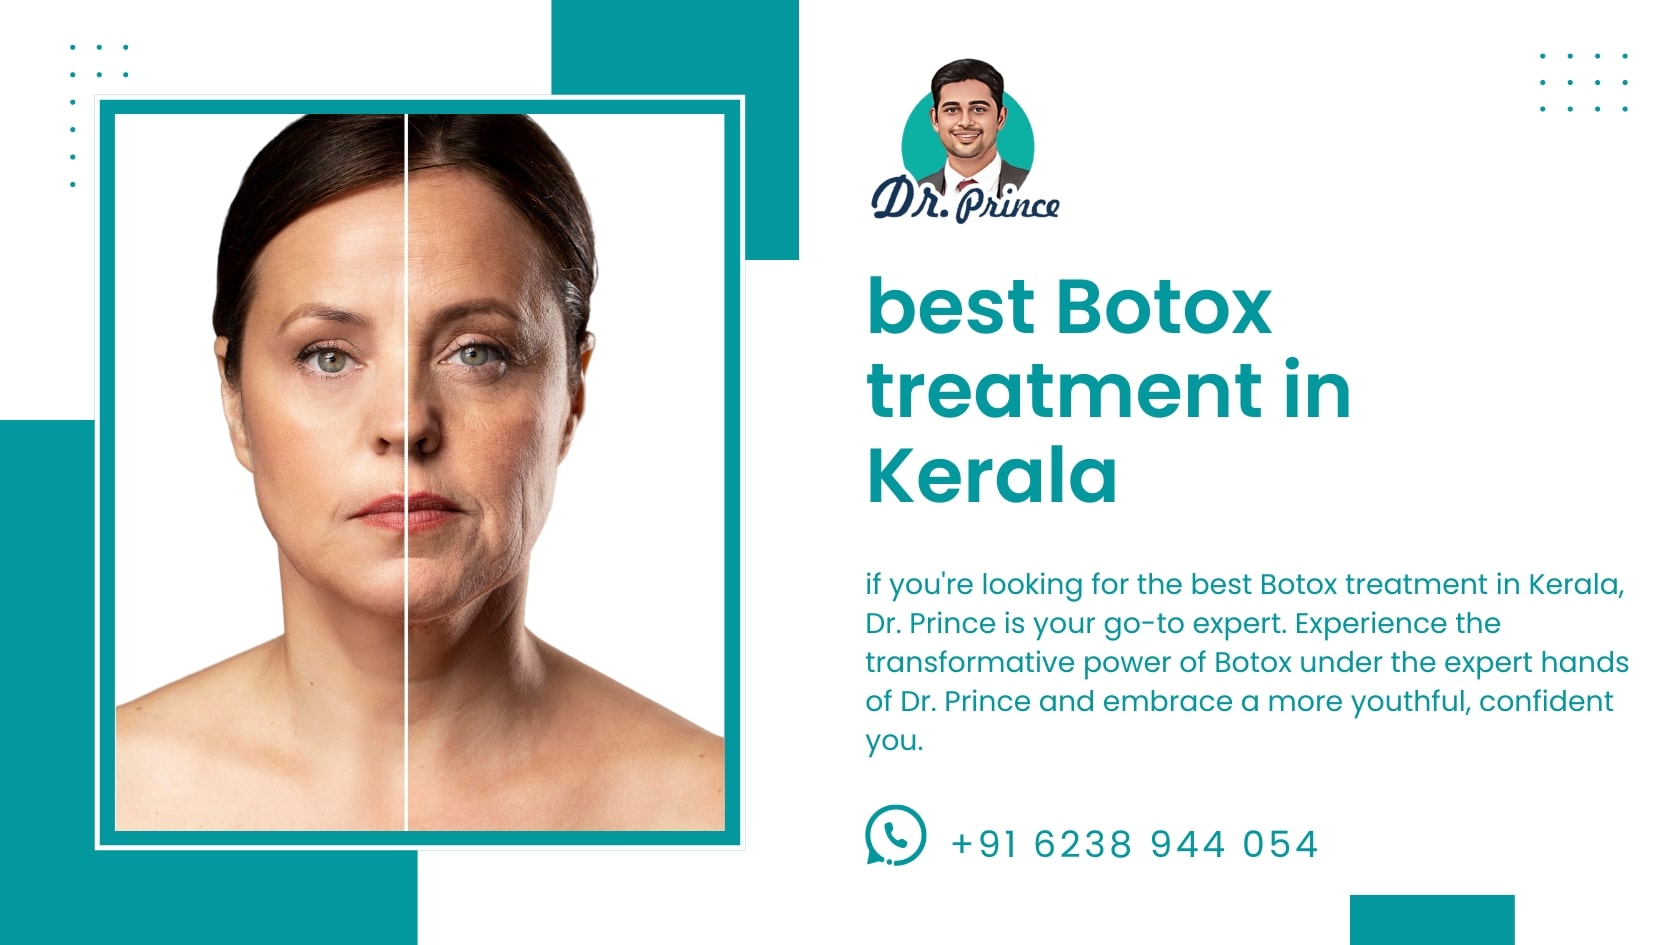 Dr. Prince performing Botox treatment at Sushrutha Institute of Plastic Surgery, Elite Hospital, Thrissur, Kerala.